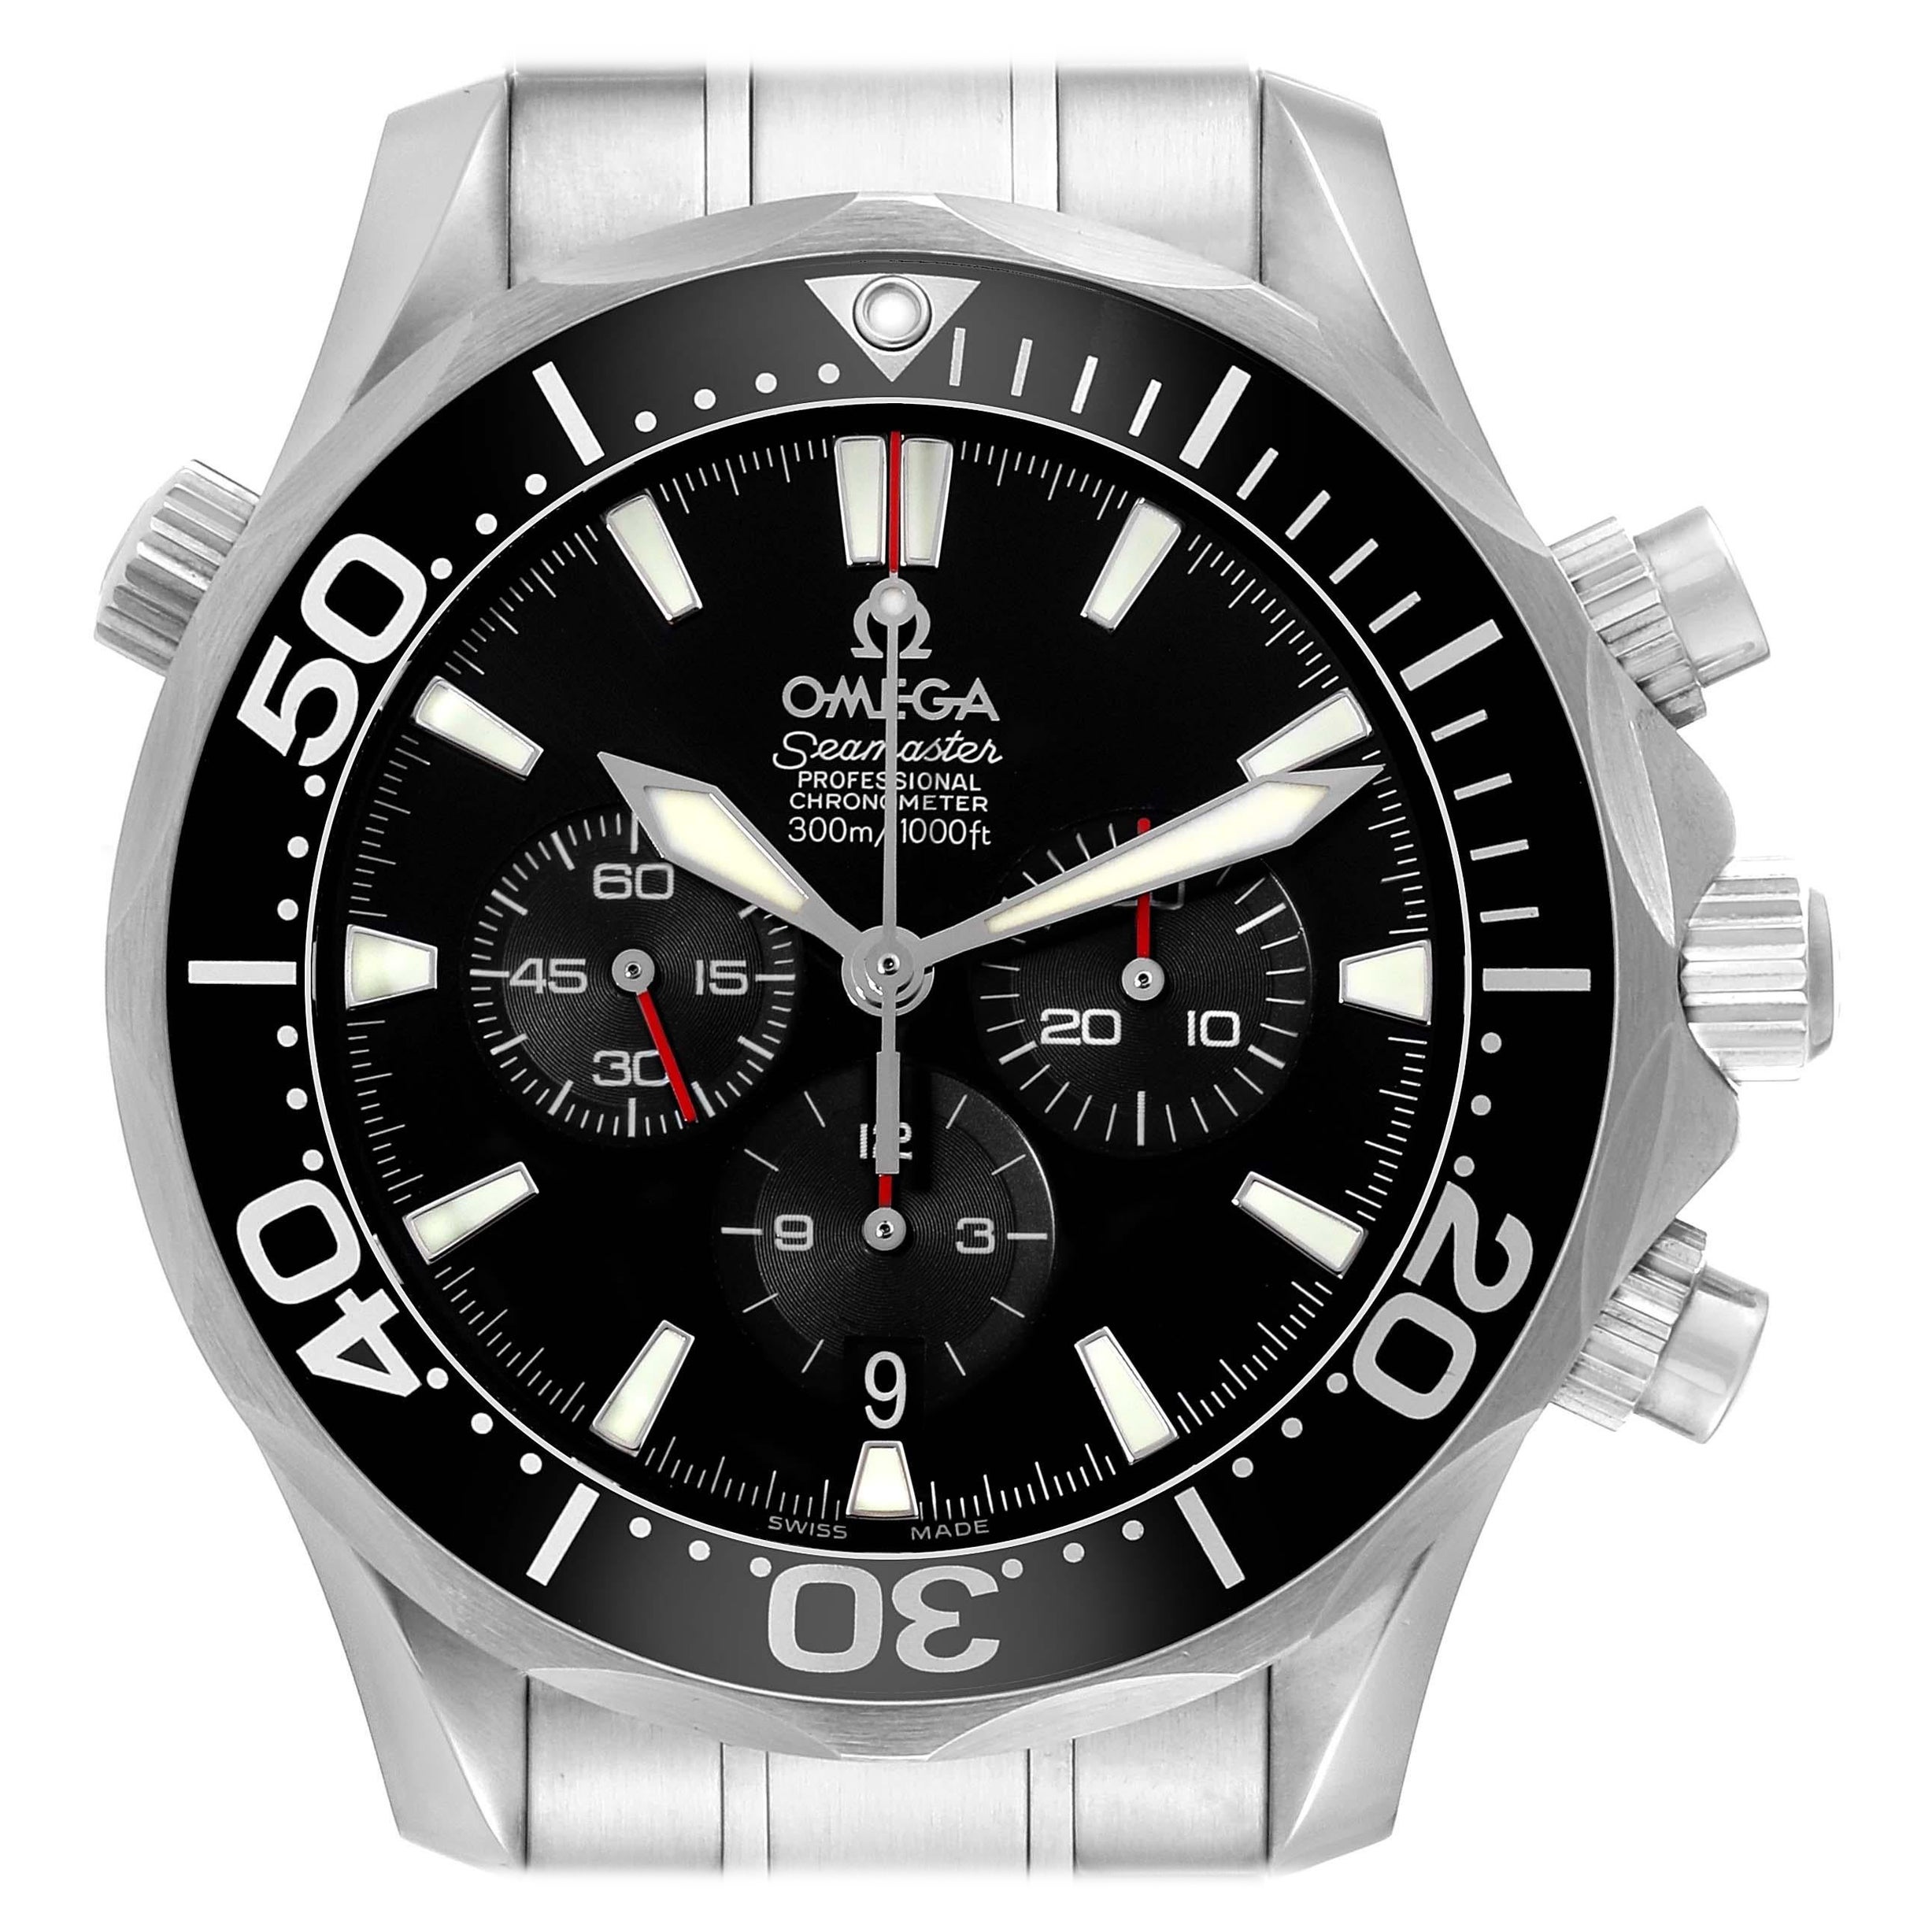 Omega Seamaster Chronograph Black Dial Steel Mens Watch 2594.52.00 Box Card For Sale